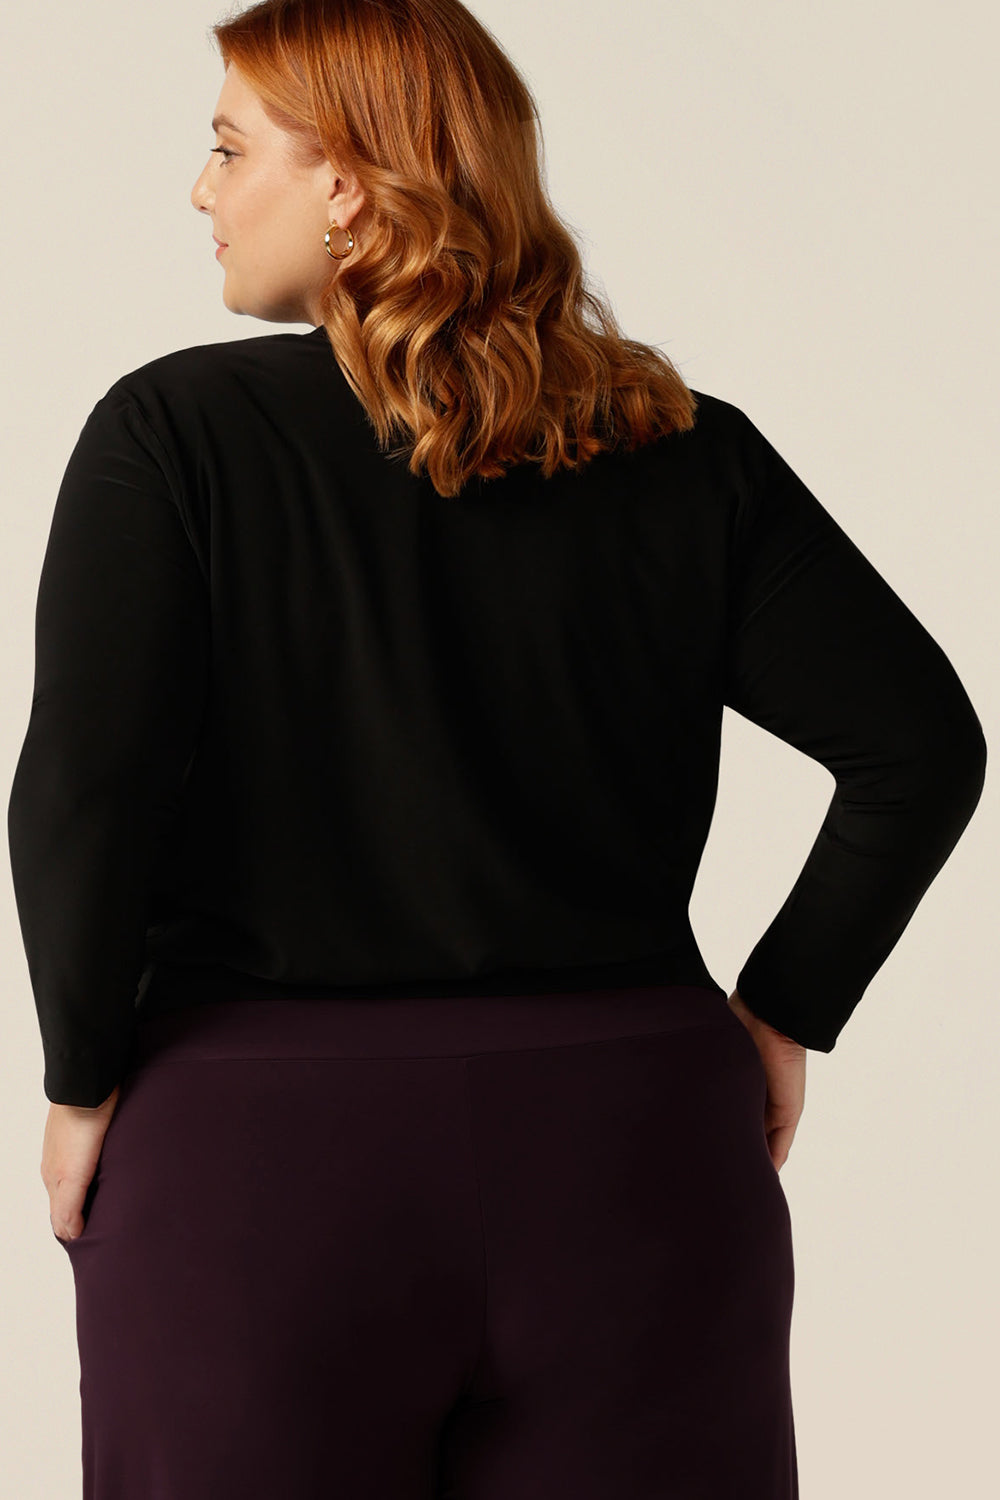 the back view of Australian women's clothing brand, elarroyoenterprises's jacket/cardigan Jacardi. Designed as an autumn/winter jacket, this cover-up is warm with long sleeves and heavy weight jersey fabric, which adds to this jacket's comfortable fit for workwear and casual layering